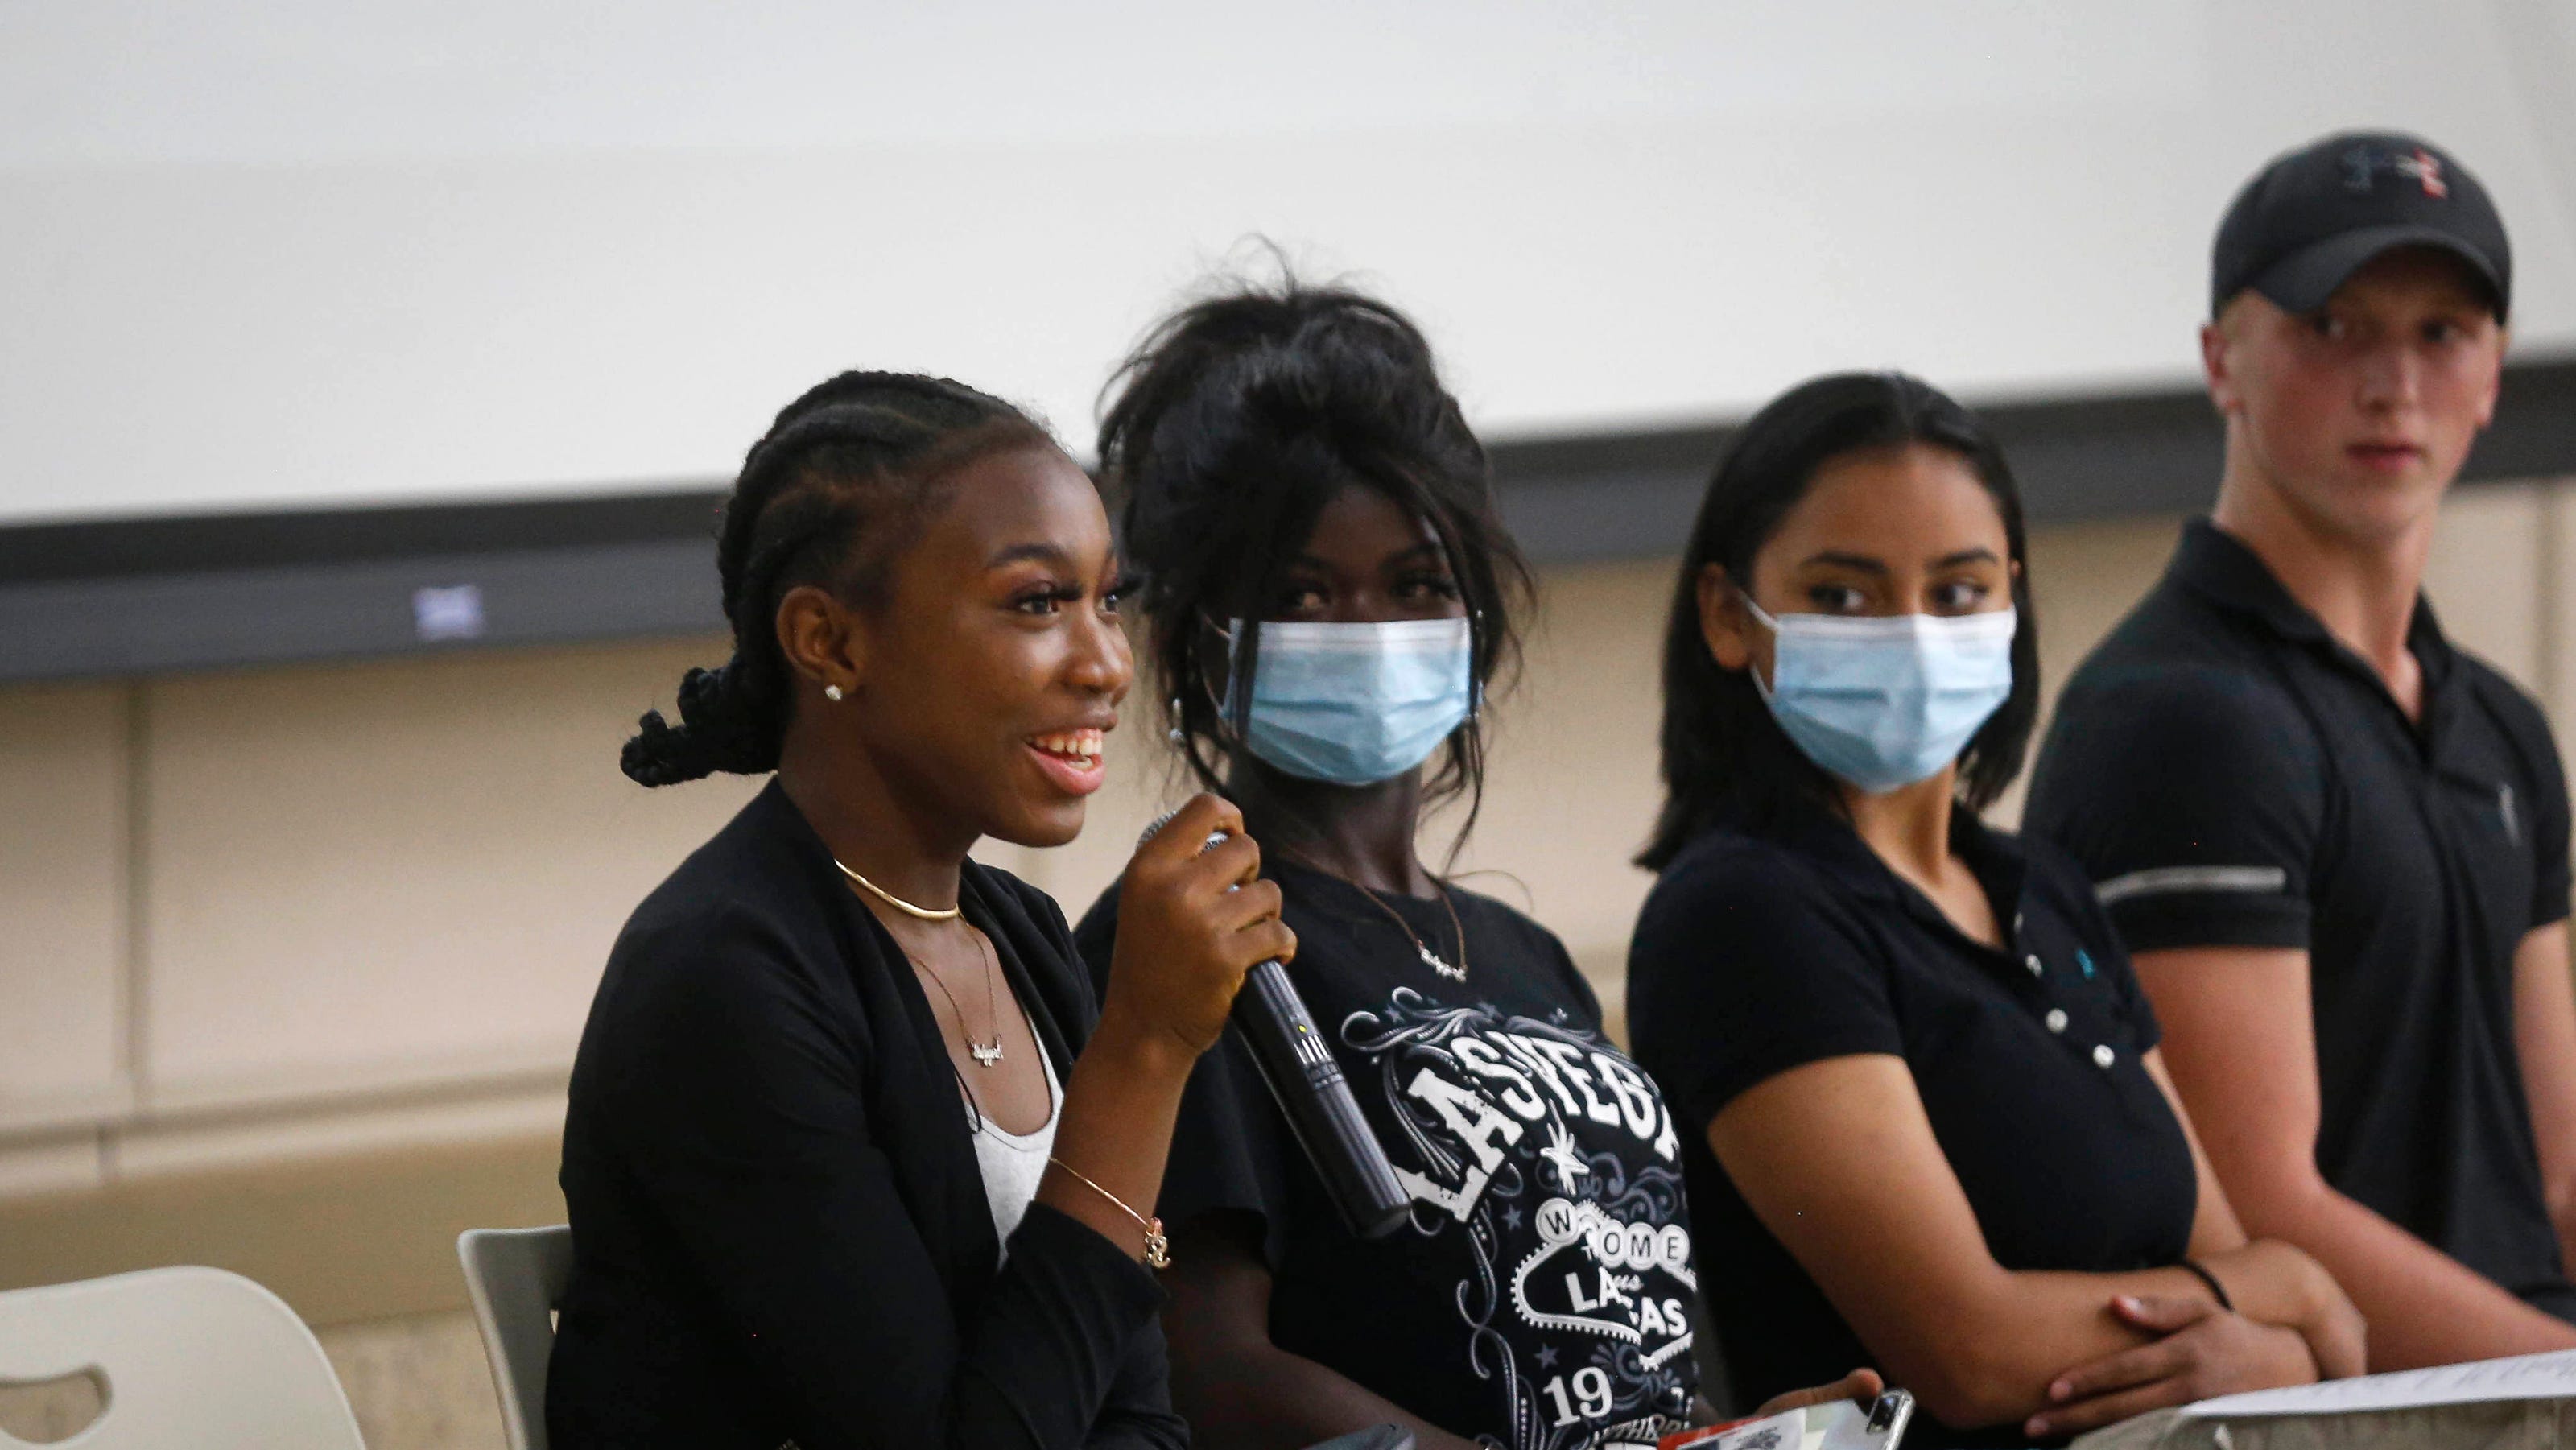 www.desmoinesregister.com: Ankeny students get applause after forum calling for more diverse curriculum